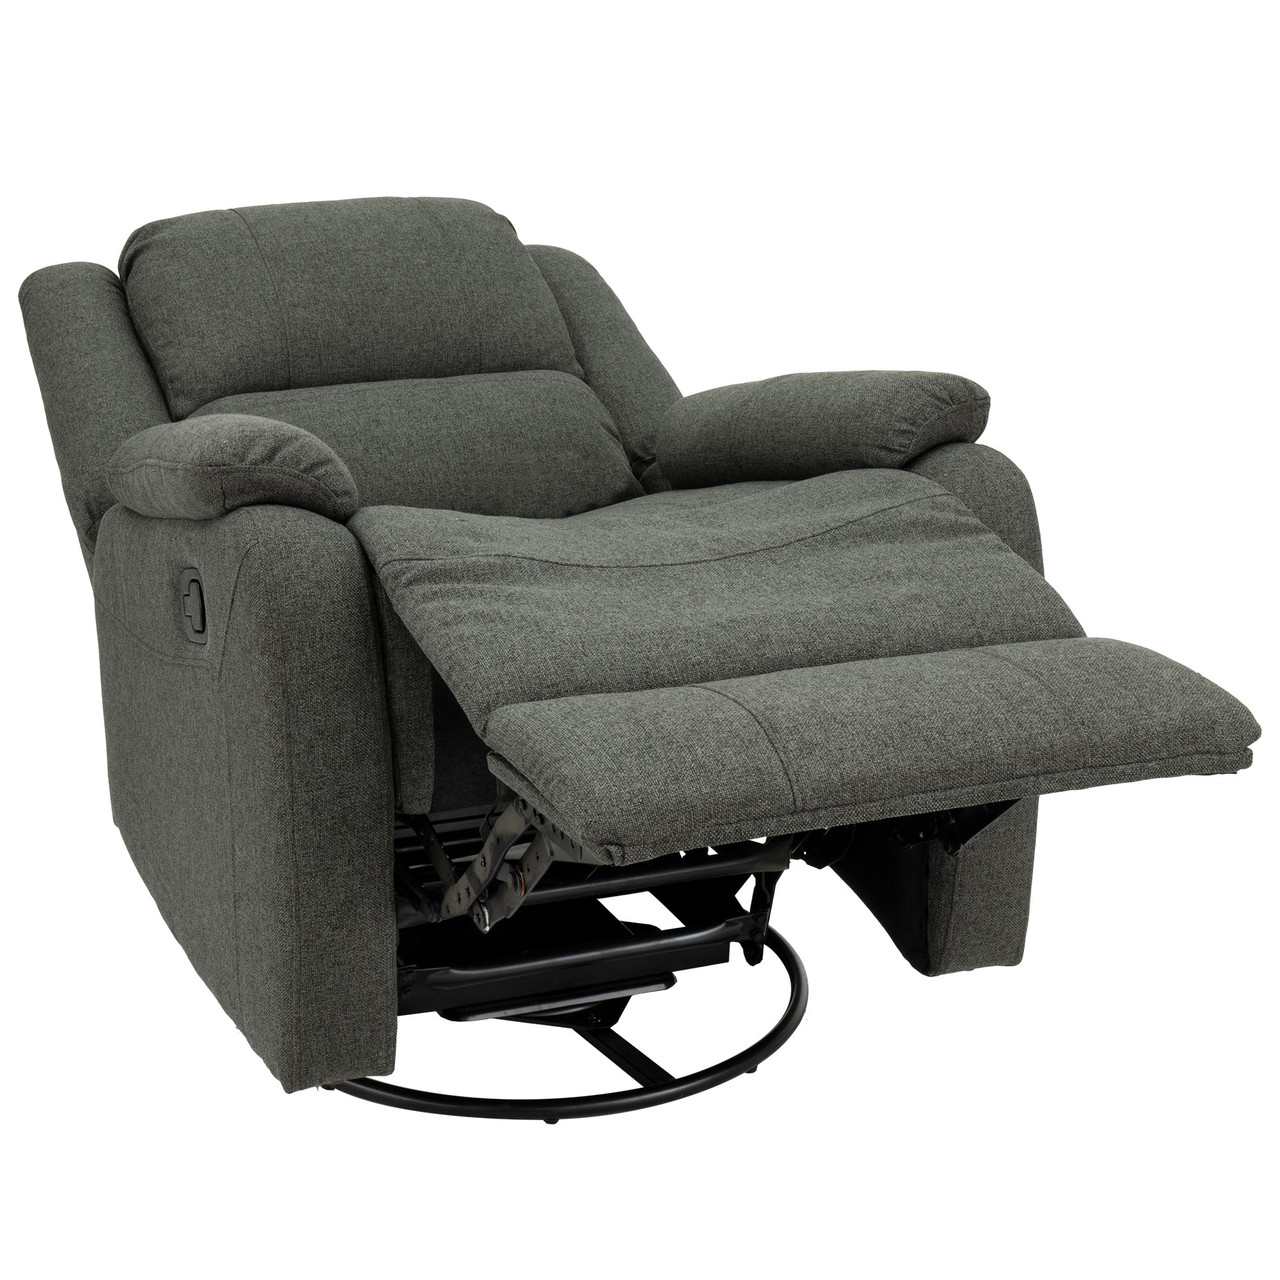 RecPro Charles 30 RV Recliner Swivel Glider Rocker Chair in Cloth - RecPro